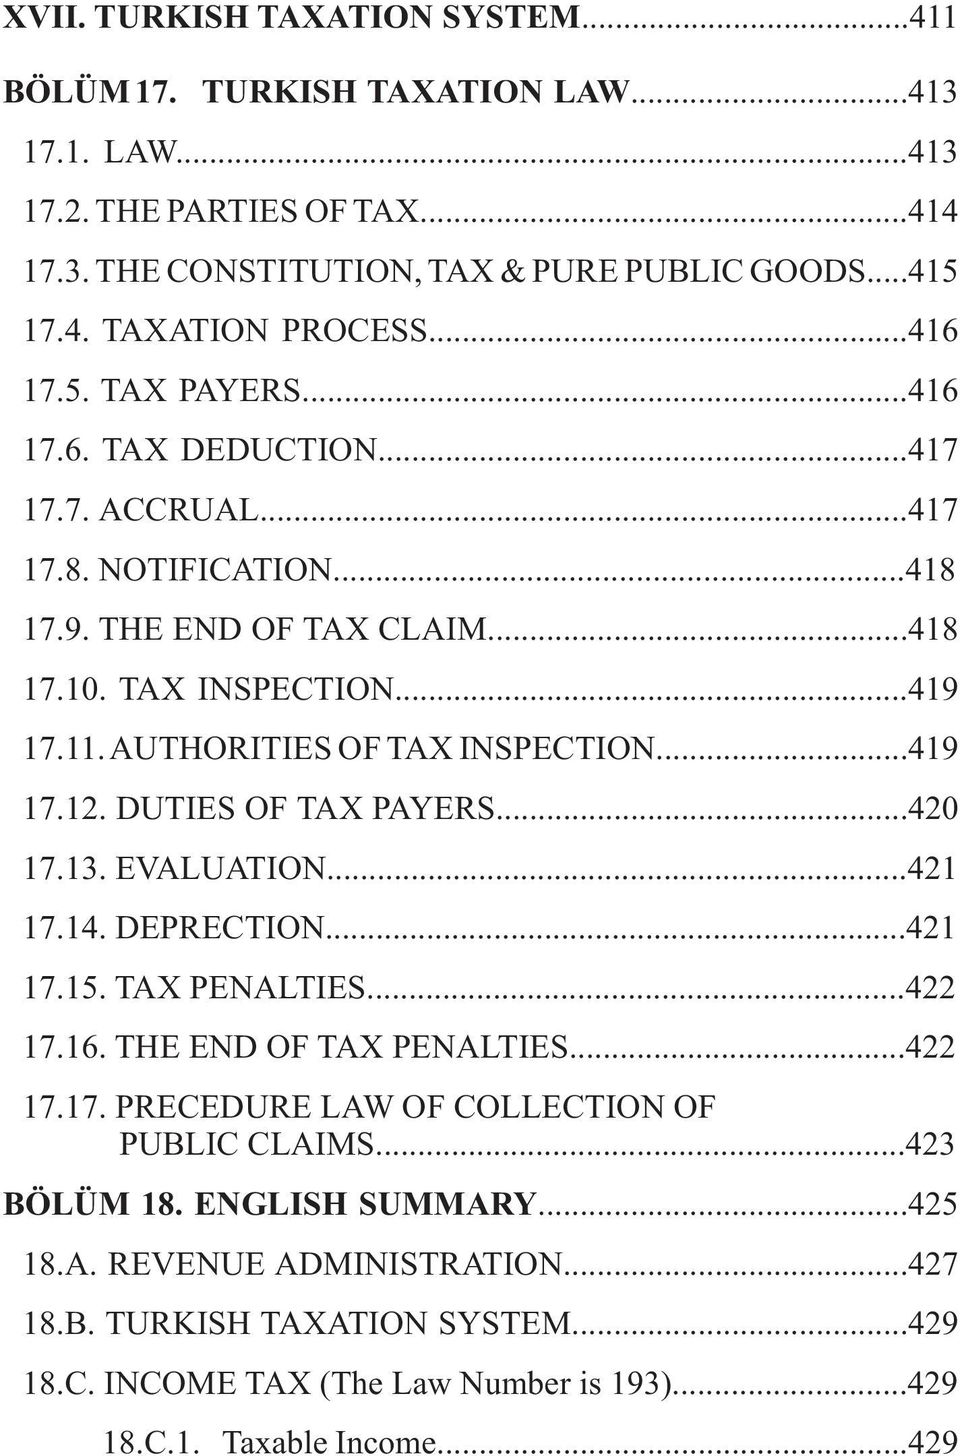 AUTHORITIES OF TAX INSPECTION...419 17.12. DUTIES OF TAX PAYERS...420 17.13. EVALUATION...421 17.14. DEPRECTION...421 17.15. TAX PENALTIES...422 17.16. THE END OF TAX PENALTIES...422 17.17. PRECEDURE LAW OF COLLECTION OF PUBLIC CLAIMS.